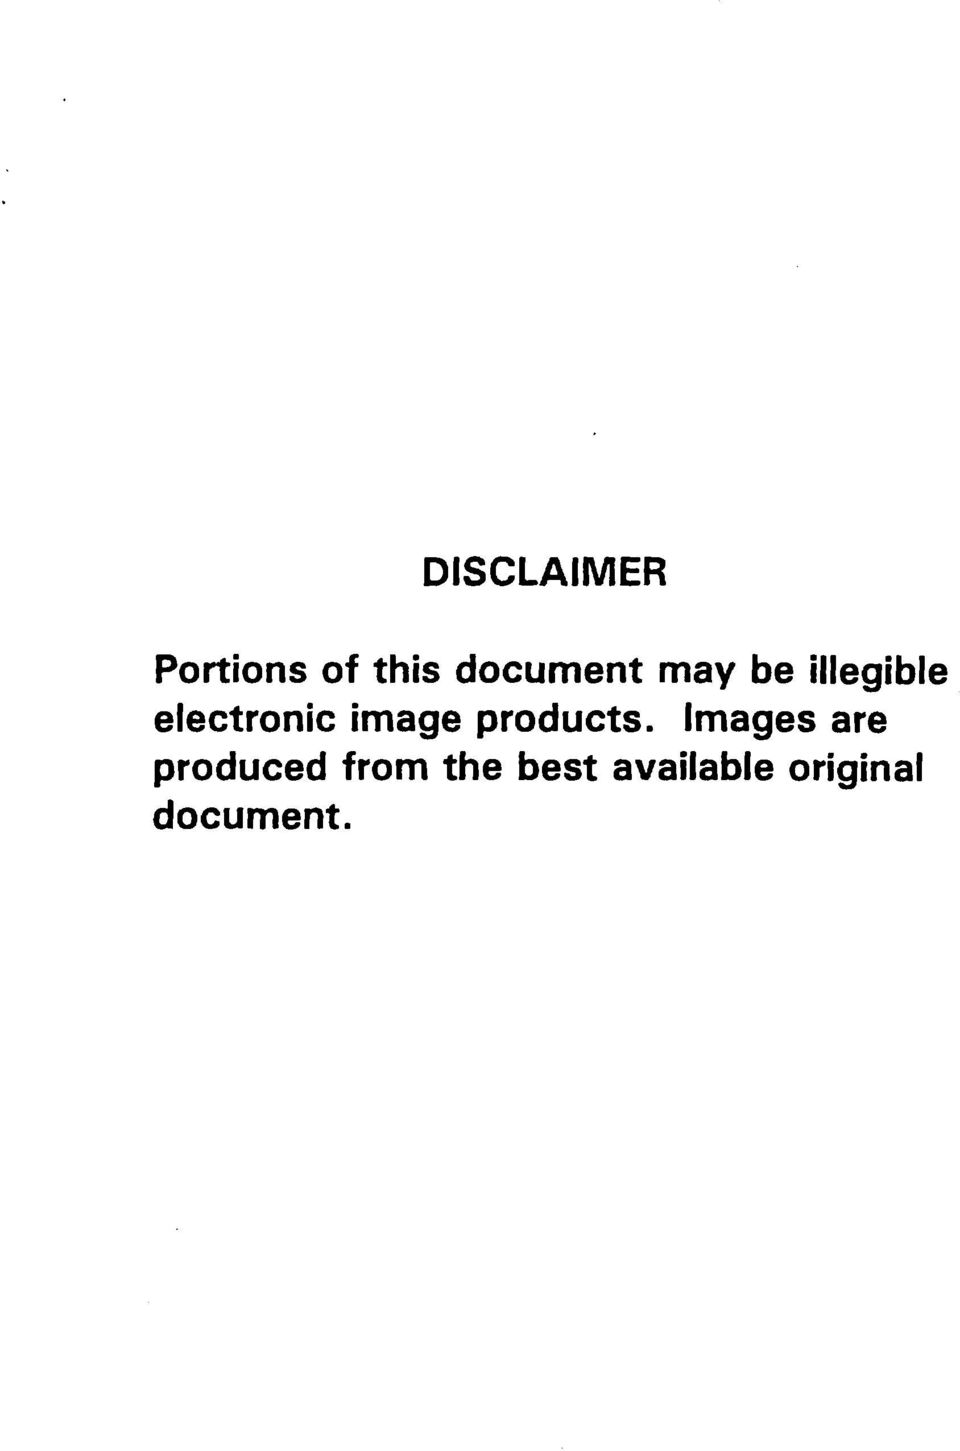 electronic image products.